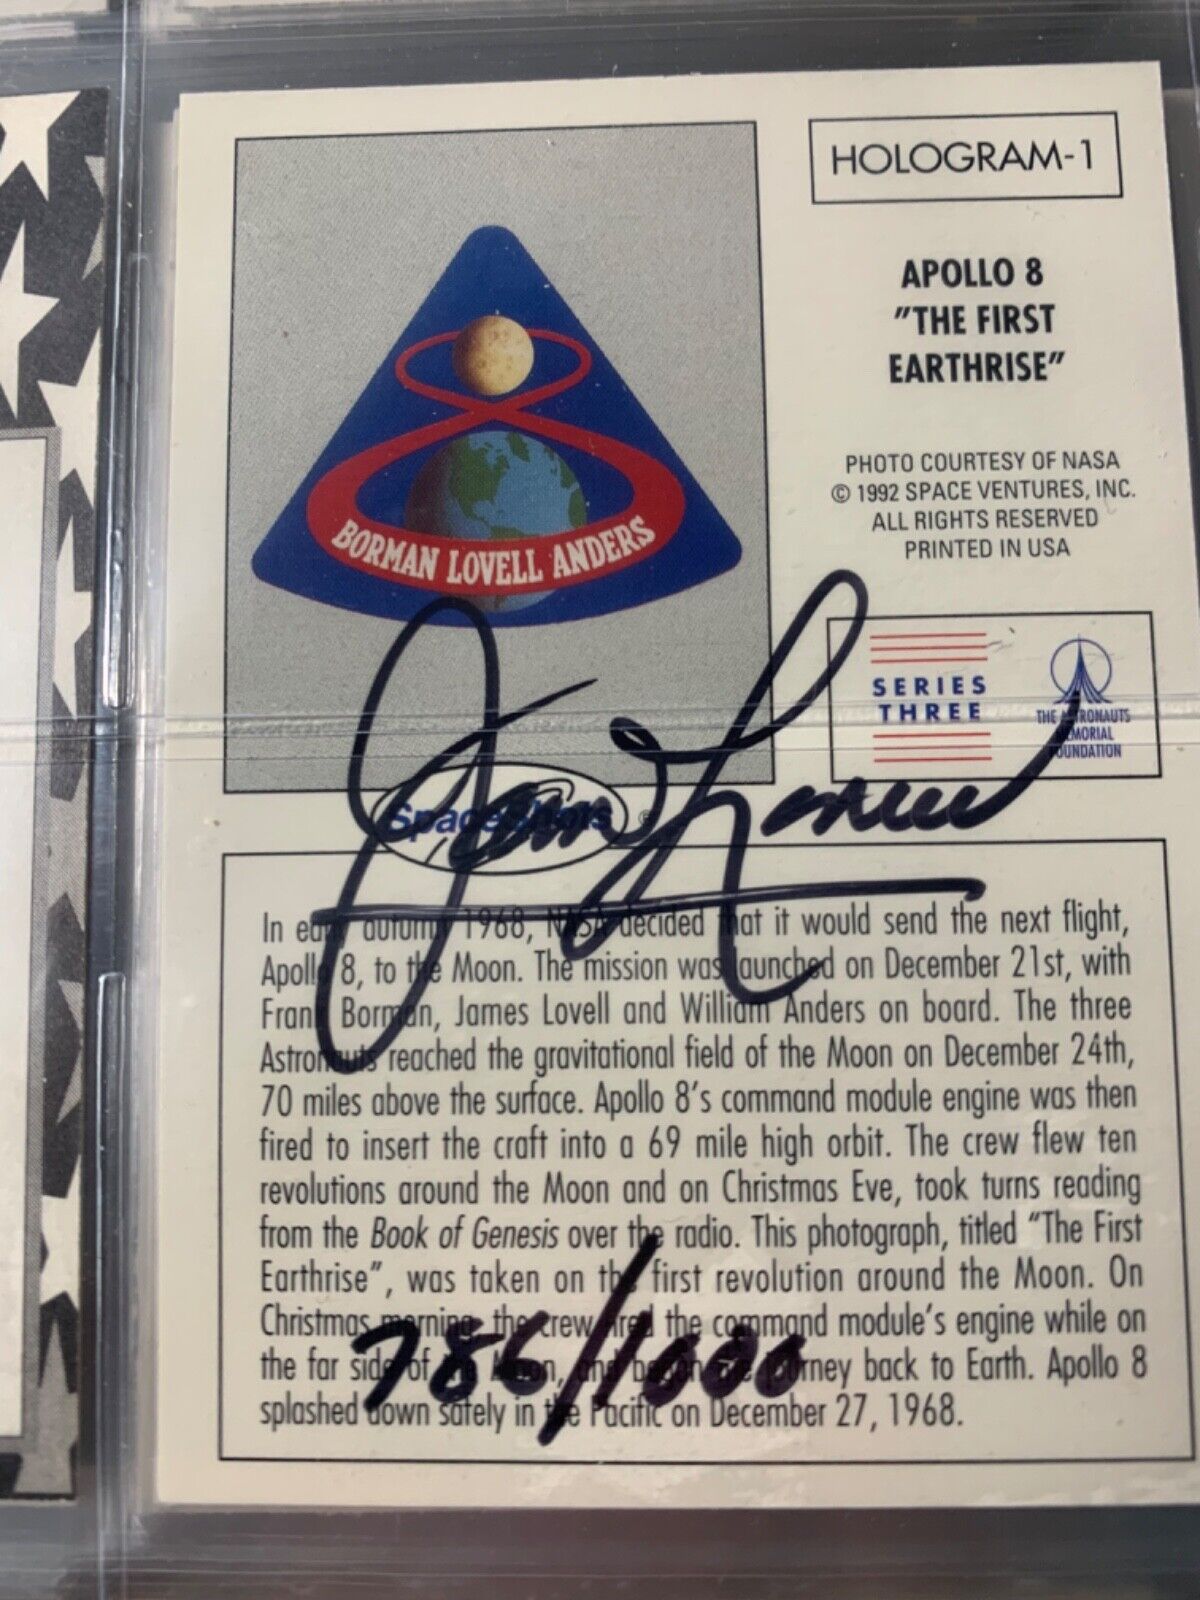 JAMES LOVELL SIGNED SpaceShots Hologram Card Earth Rise Apollo 8 mission